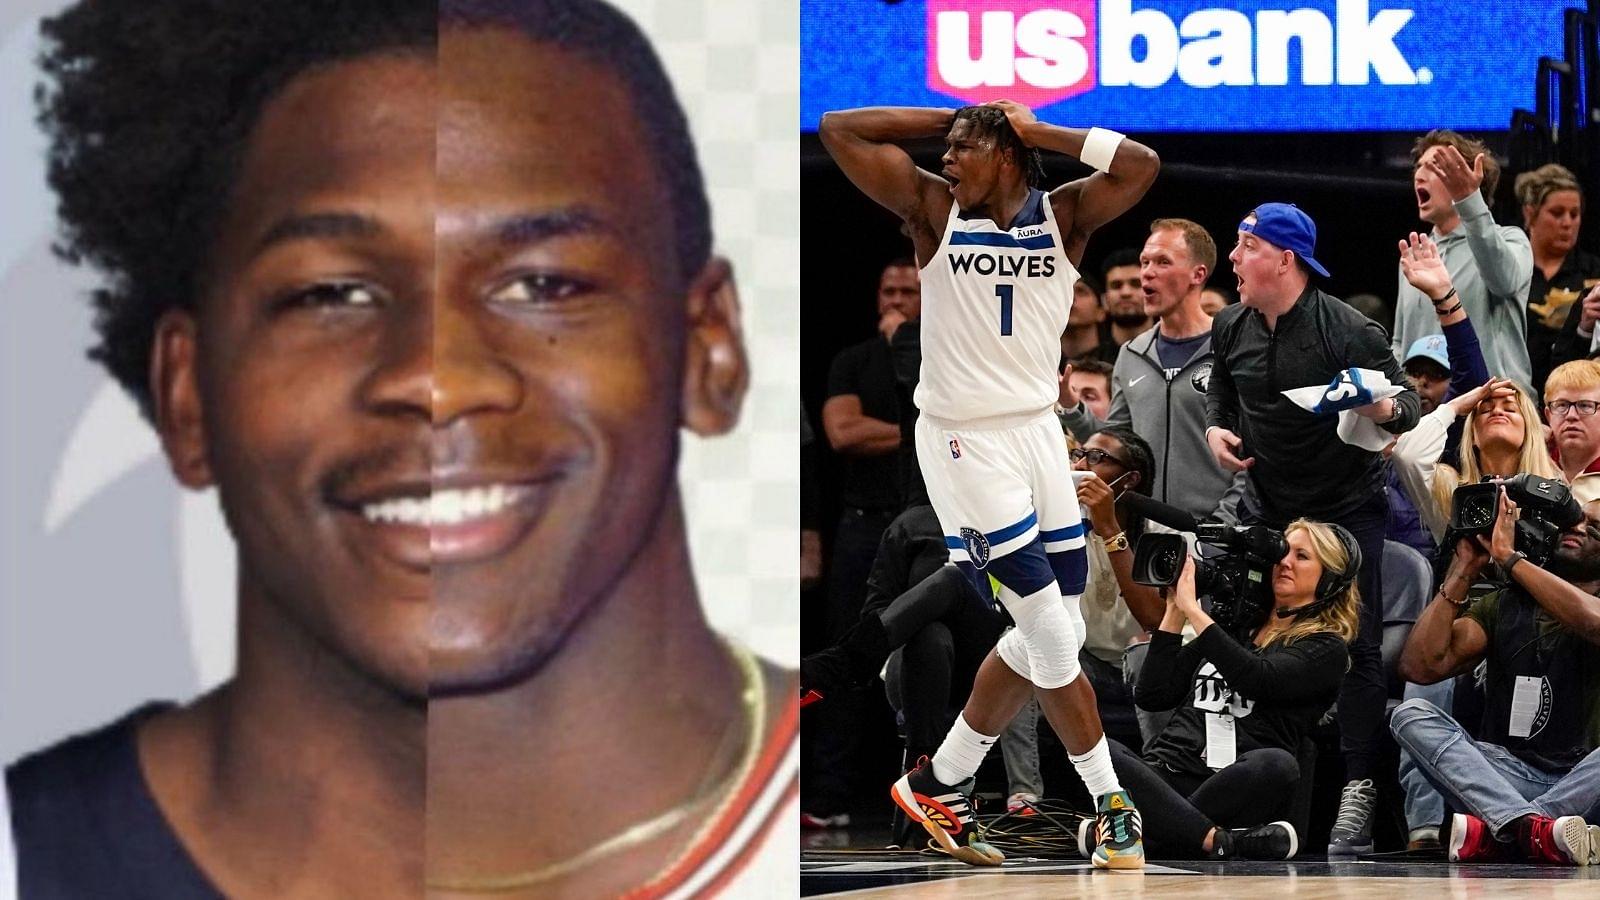 “Anthony Edwards or Michael Jordan??”: Timberwolves' #1 calls his inner MJ out, as Karl-Anthony fouls out at a crucial time in Play-in game against the Clippers